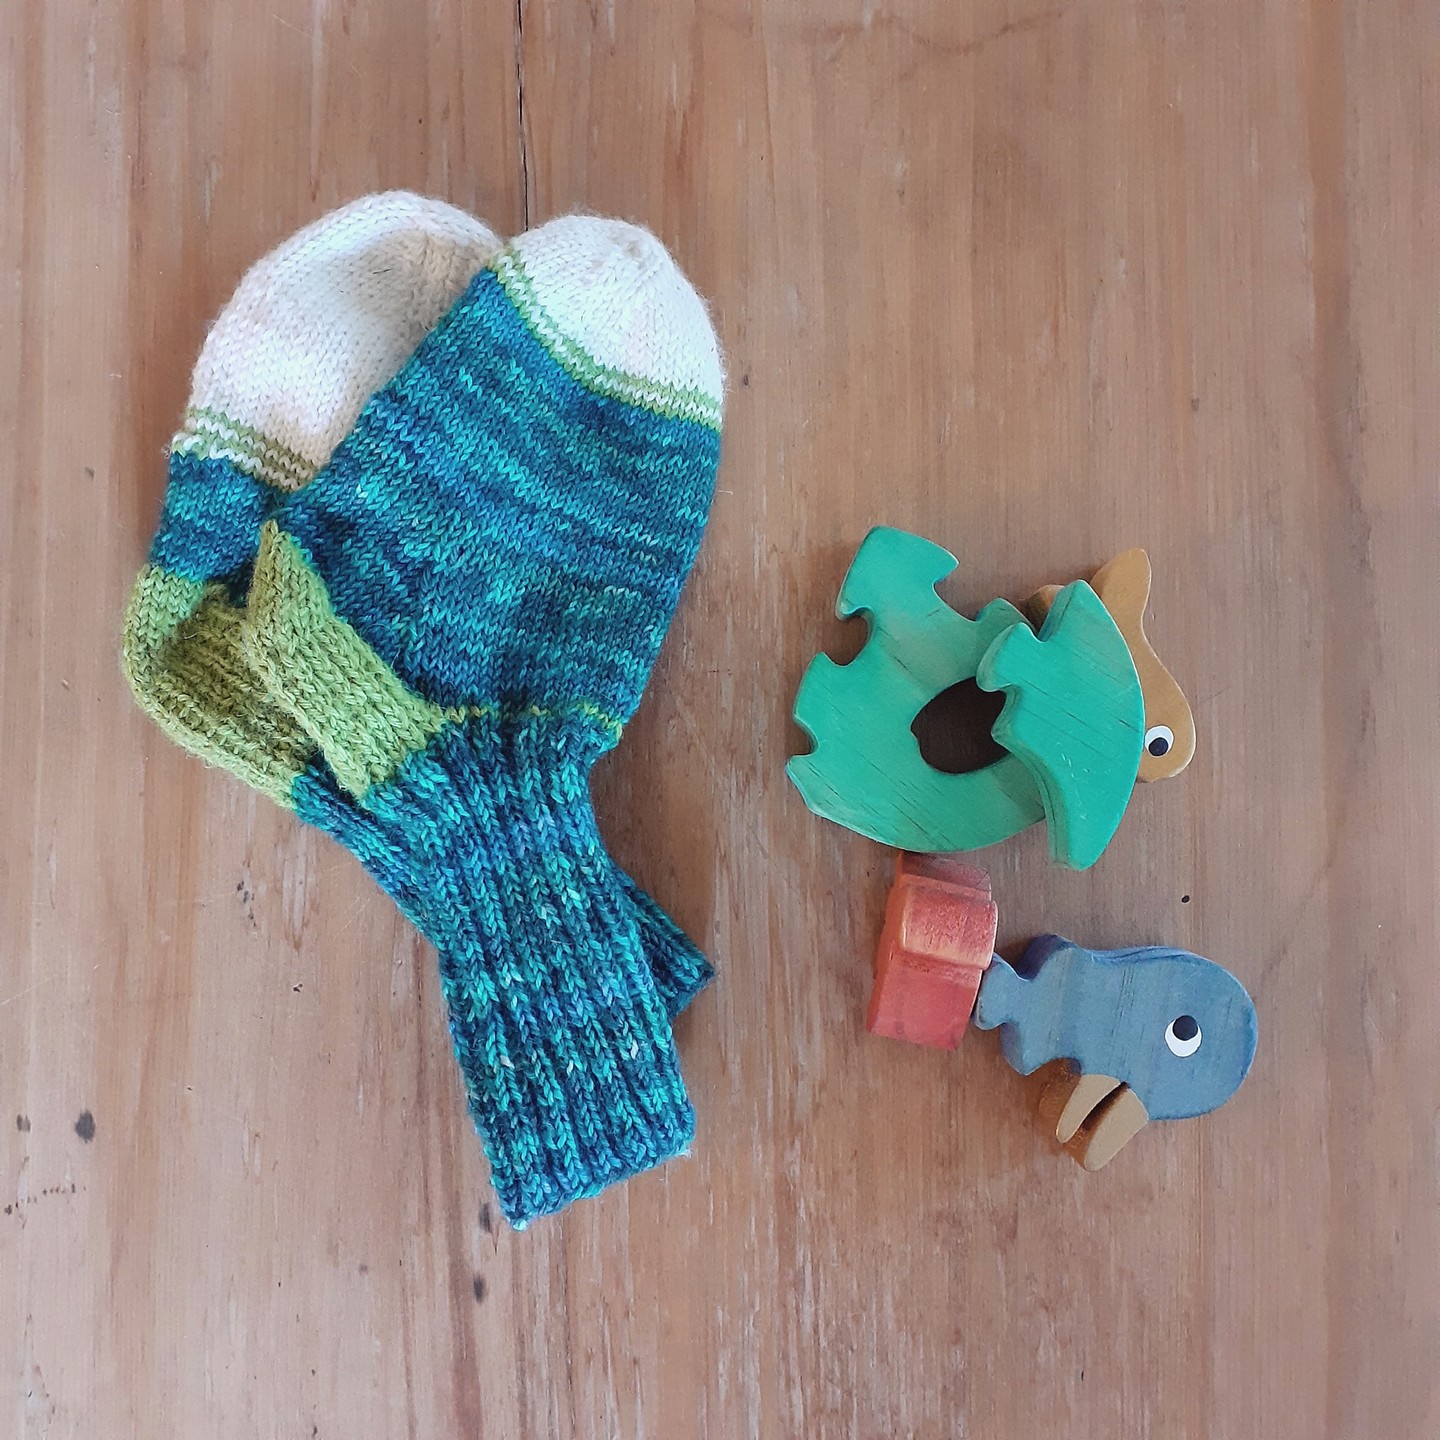 Hot days, life has slowed down. We're retreating inside in the hottest part of the day to read and make things together. Finished a pair of #scrappysocks. 

'In summer, remember winter'

Lucky I had this decapitated kororā on hand for the photo.

Tony is back out in the workshop and trugs are back in stock. We hope the many Christmas trugs are finding their place in the pattern of your lives. 

#monstersocks free pattern you can find at #purlsohotoddlersocks 

#sustainablyharvested #handmadeinnz #handmadegifts #handmadeingoldenbay #supportlocalnz #buynzmade #shoplocalnz #sustainablysourcedtimber #locallysourced #sustainablymade #chemicalfree #untreatedwood #goldenbay #goldenbaynz #anatoki